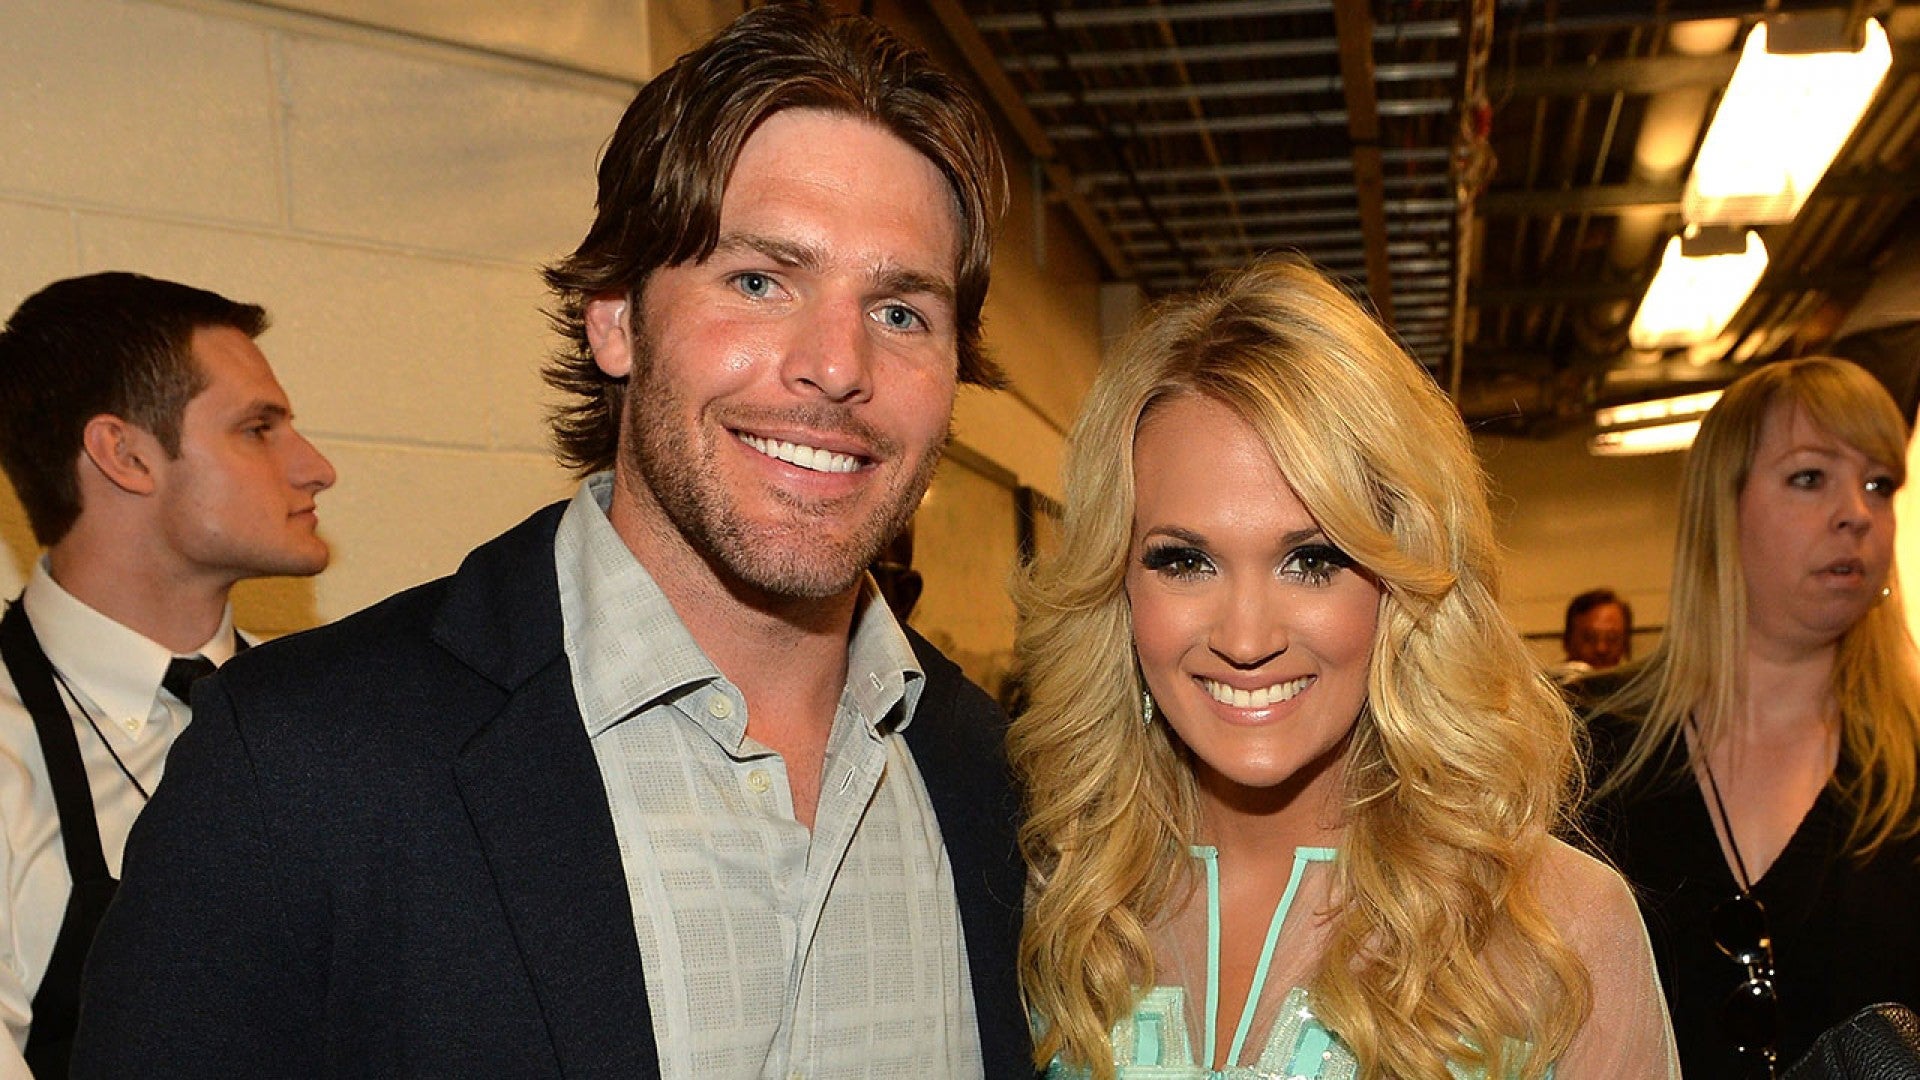 Carrie Underwood Sex - Carrie Underwood Shares Sweet Post on Husband Mike Fisher's 37th Birthday